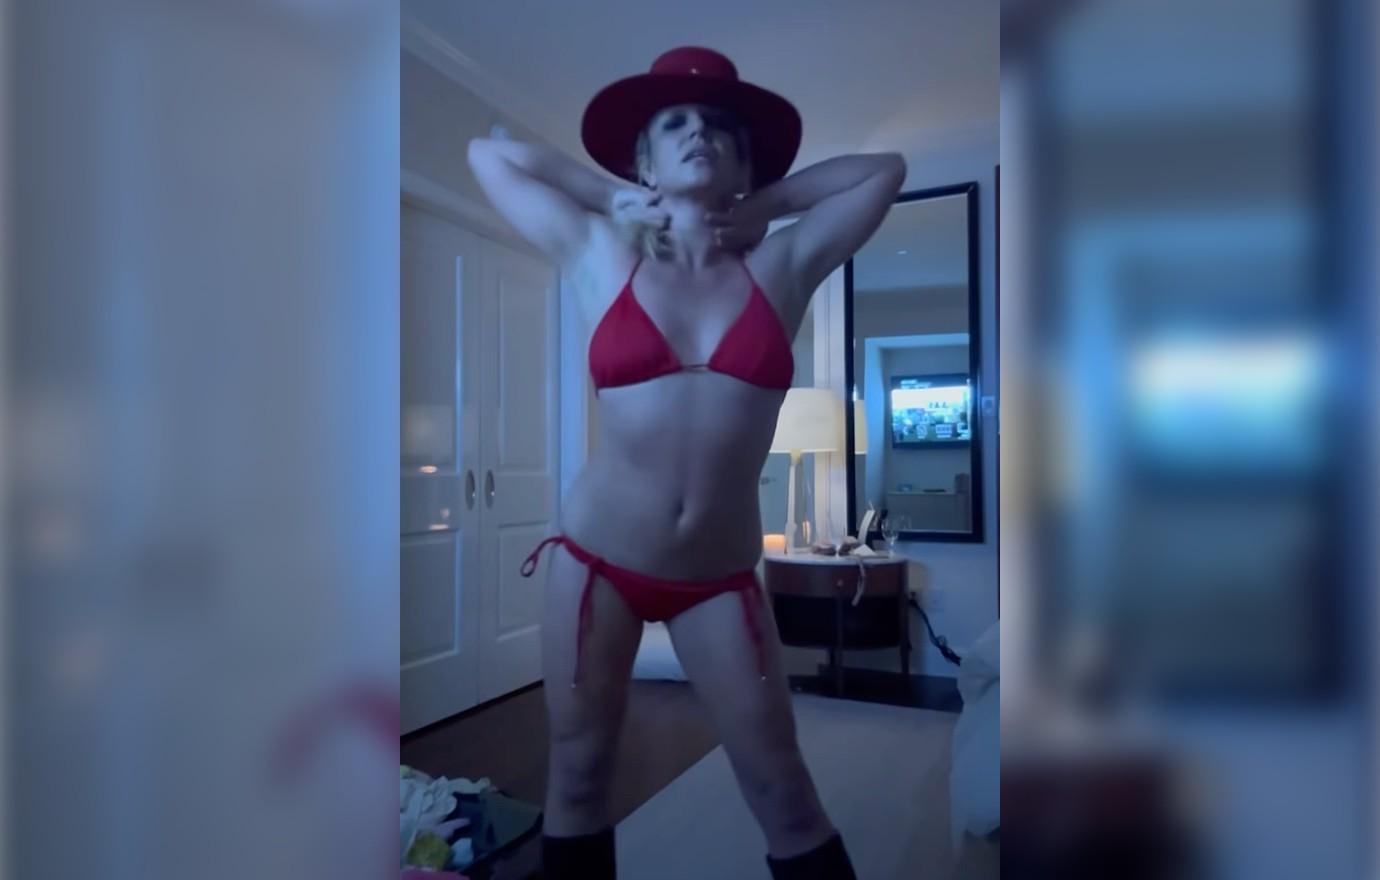 Britney Spears Shows Off Weird Dance Moves In Bizarre Video Watch picture